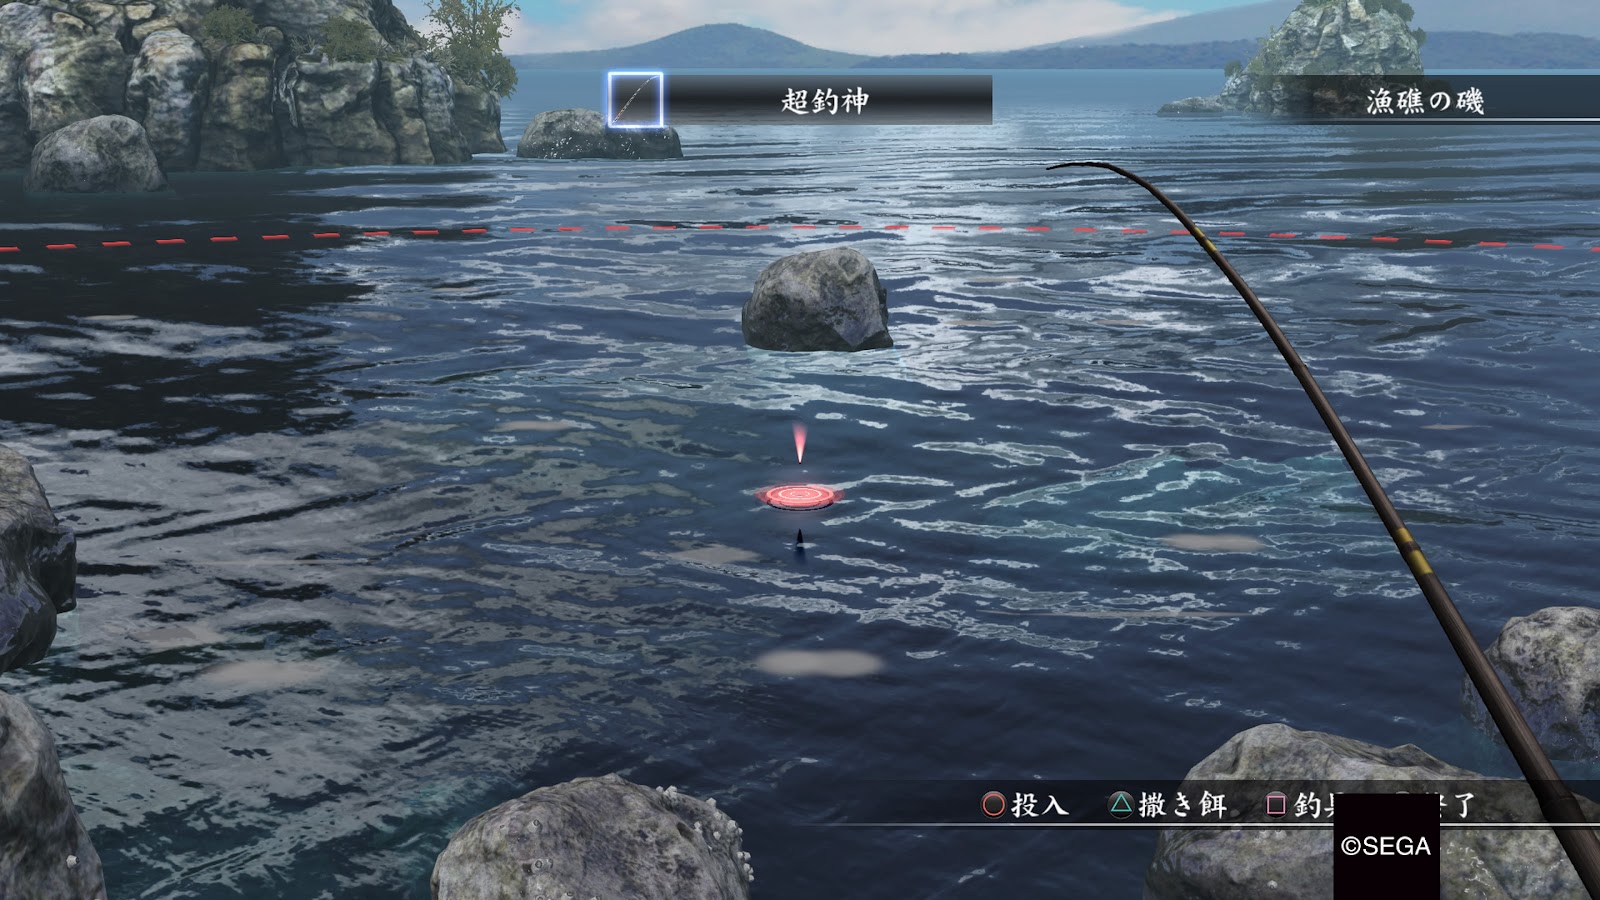 A Deep Dive Look into Fishing Minigames – The Story Arc